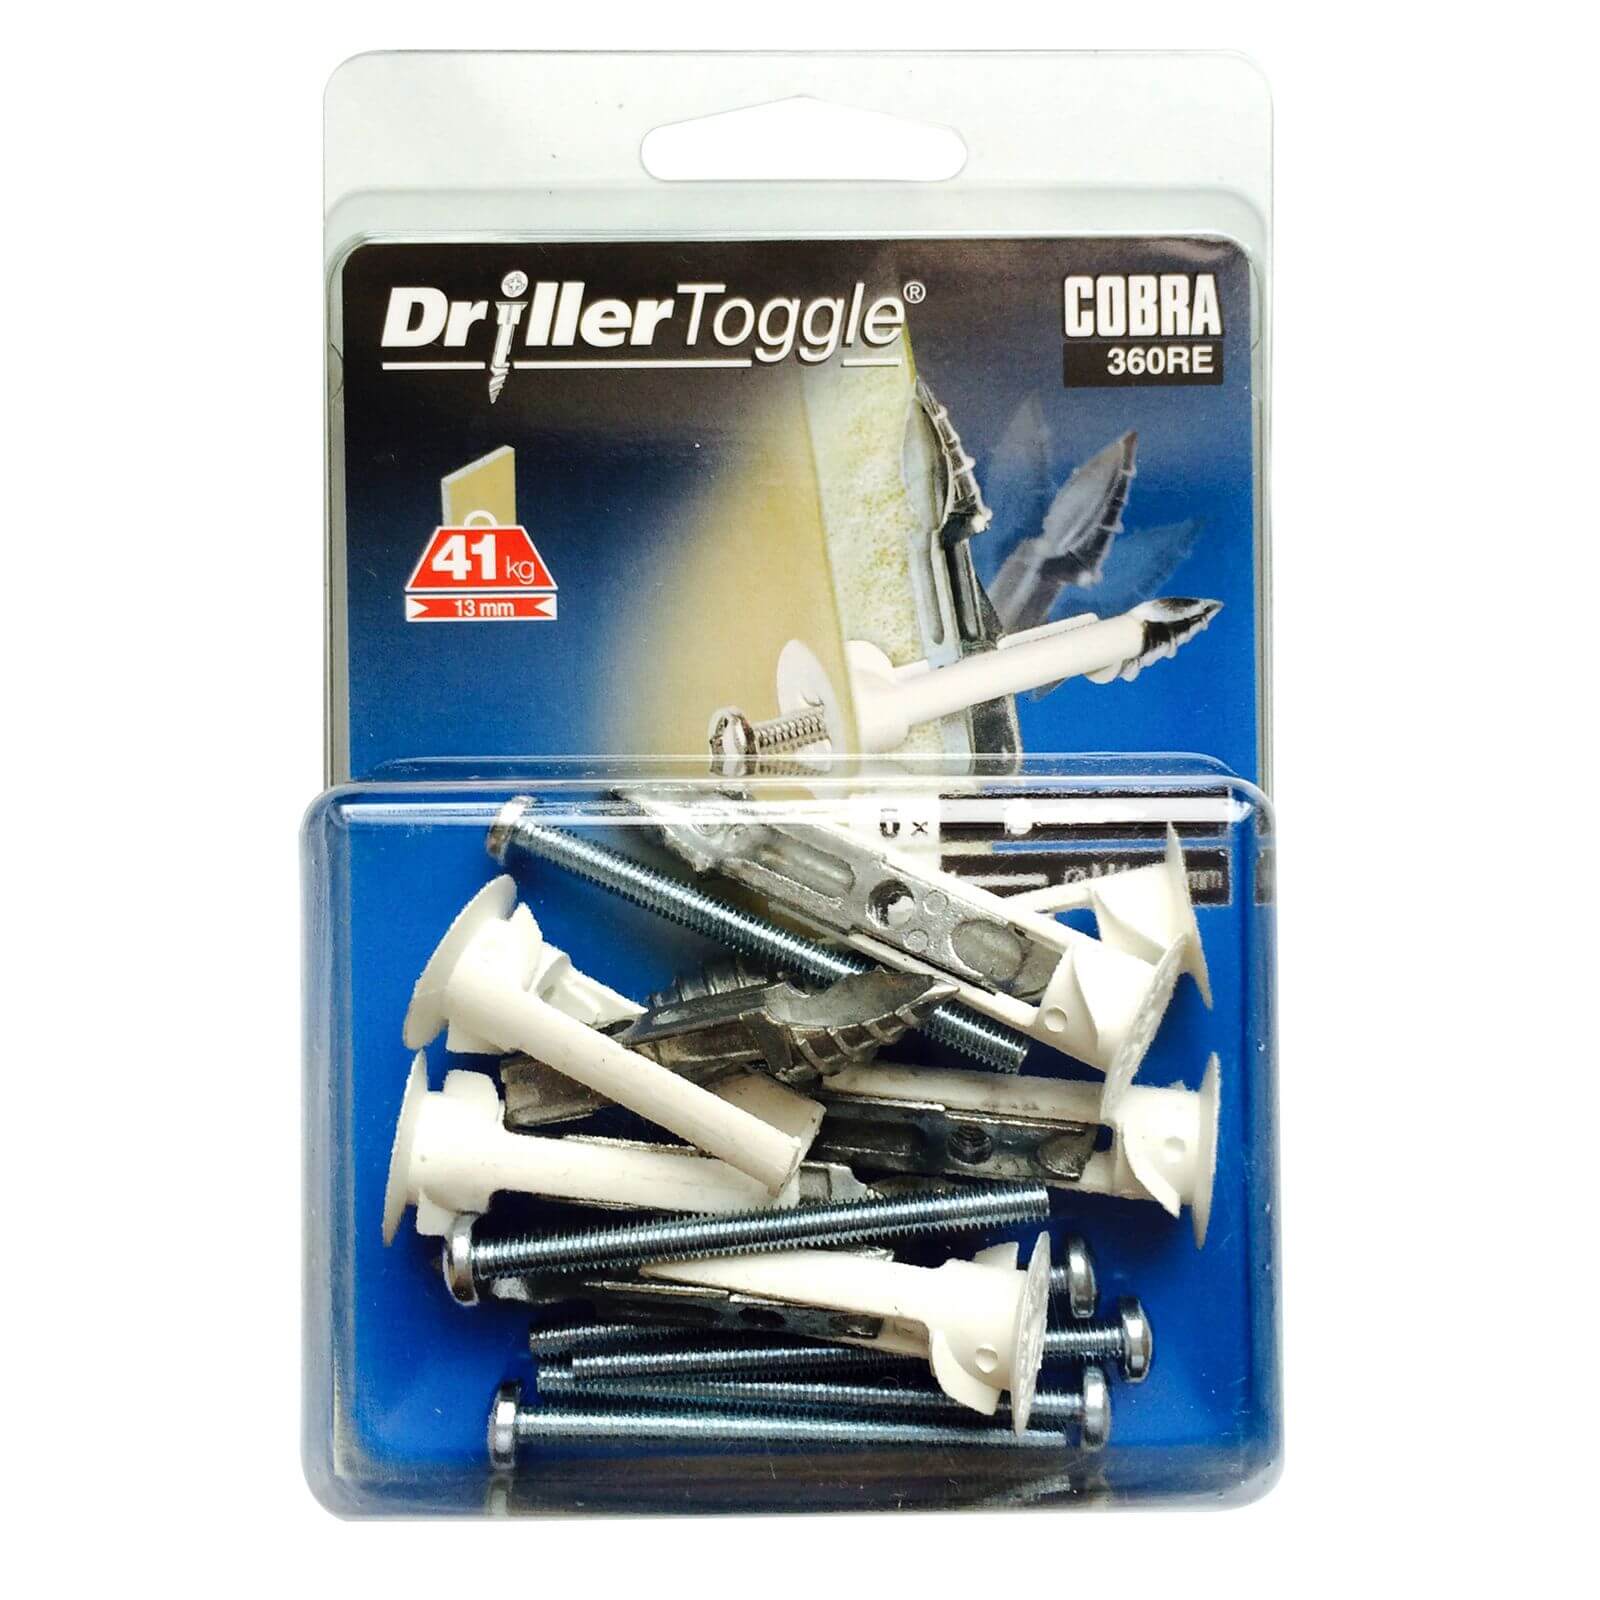 Cobra Driller Toggle - Hollow Wall Fixings x 6 - 360RE